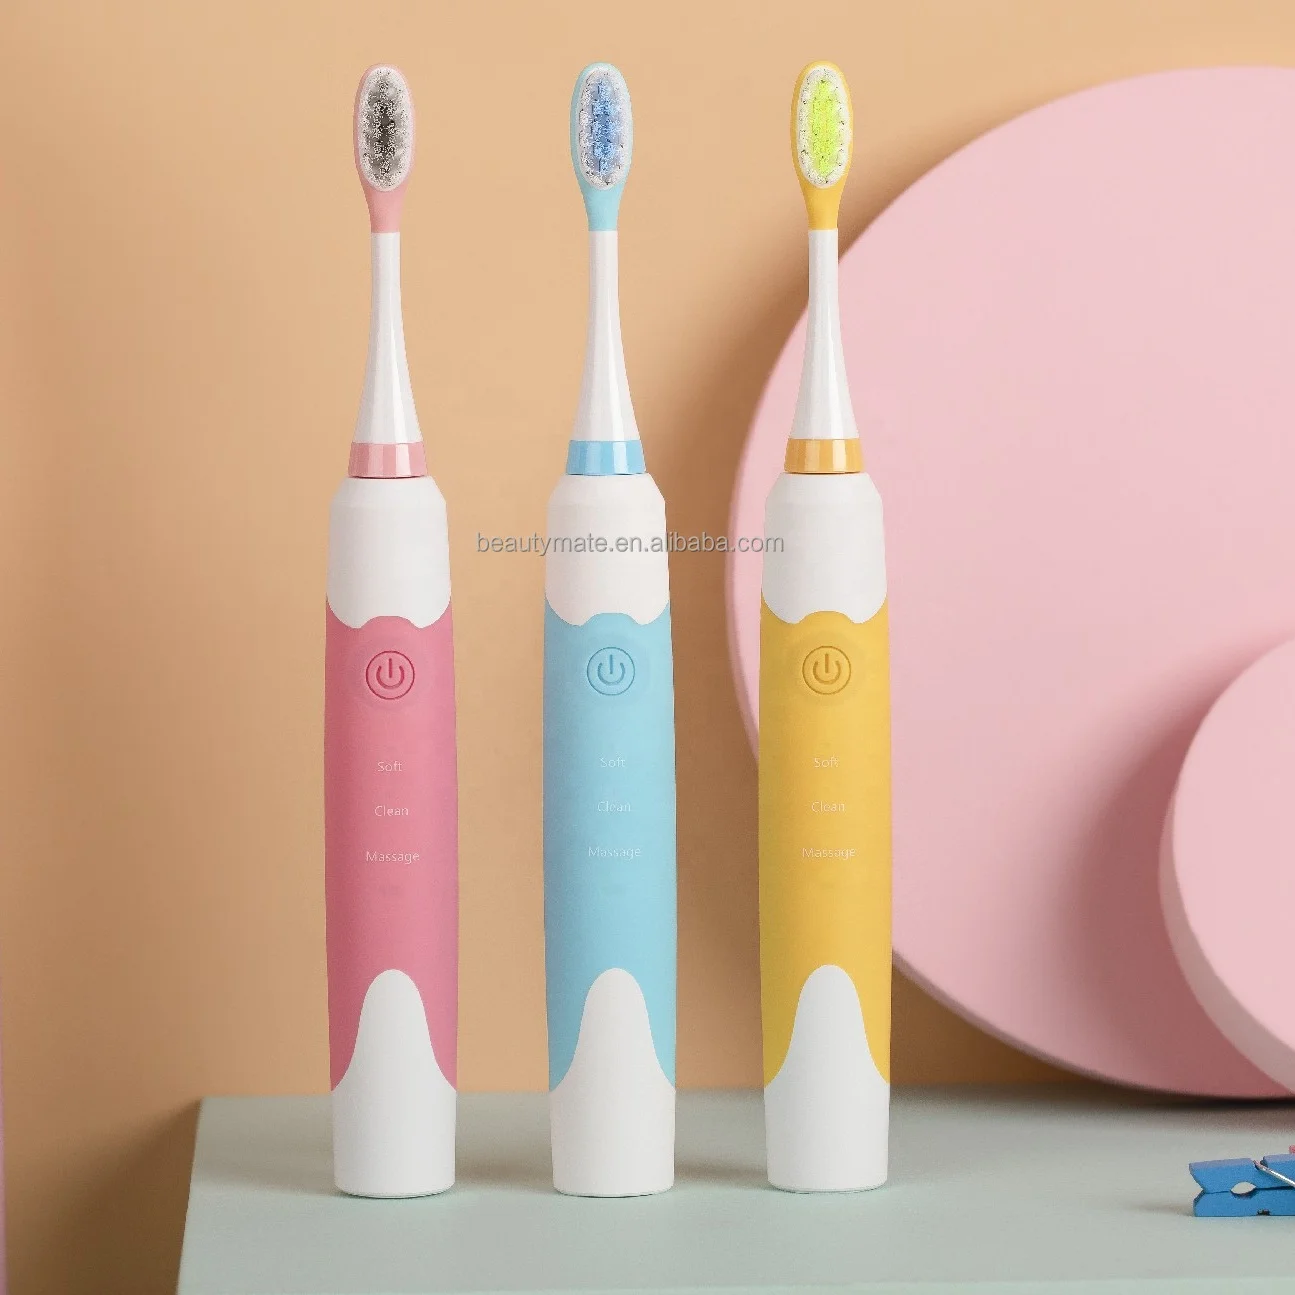 

Children electrical sonic toothbrush IPX7 waterproof manufacturer wholesale rubberized kids use oral hygiene 2 heads